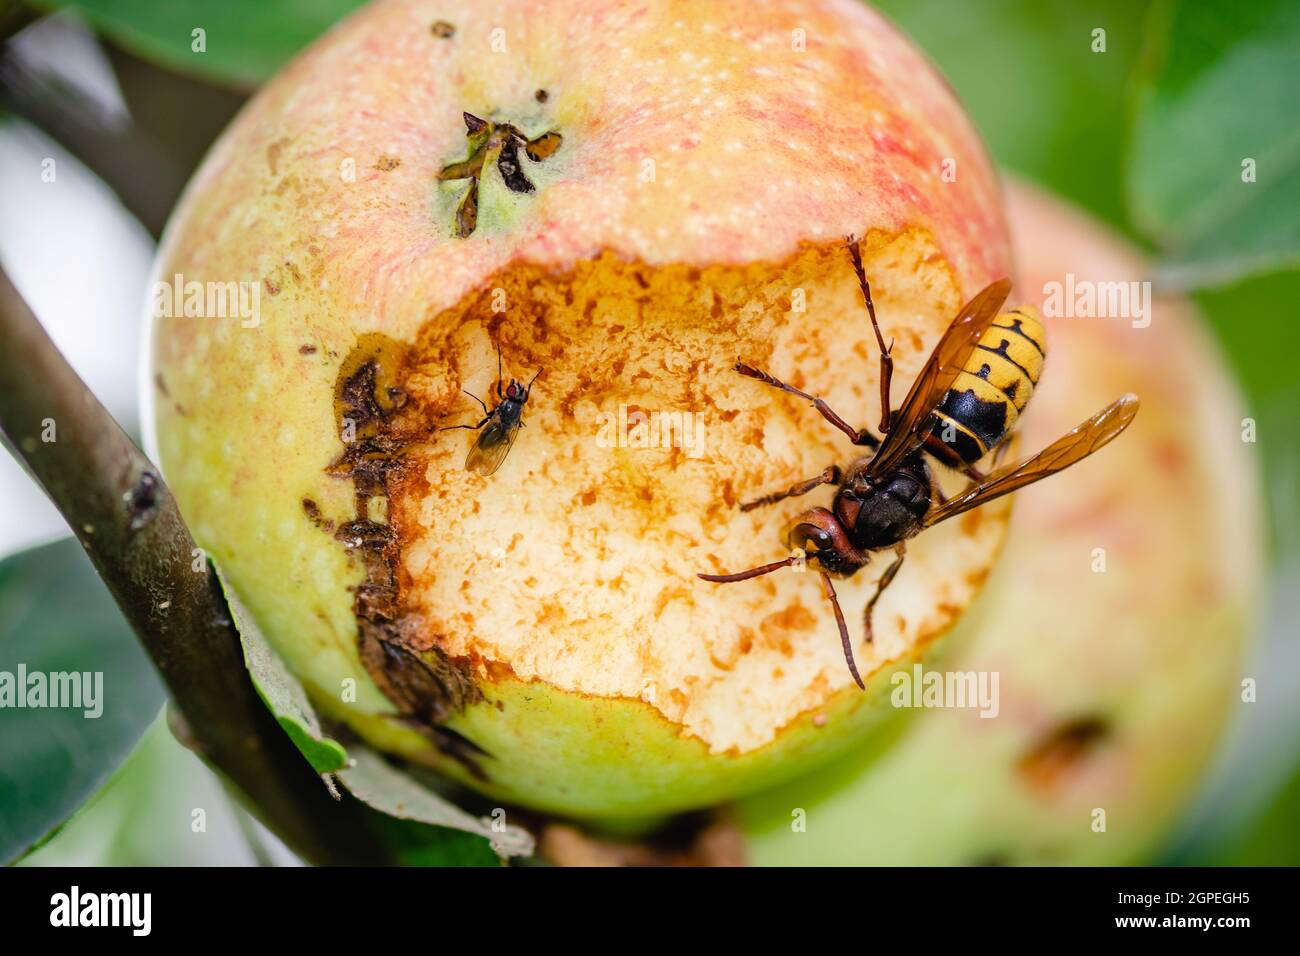 Giant European hornet wasp or Vespa crabro with small fly eating an apple hanging from a tree, close up Stock Photo